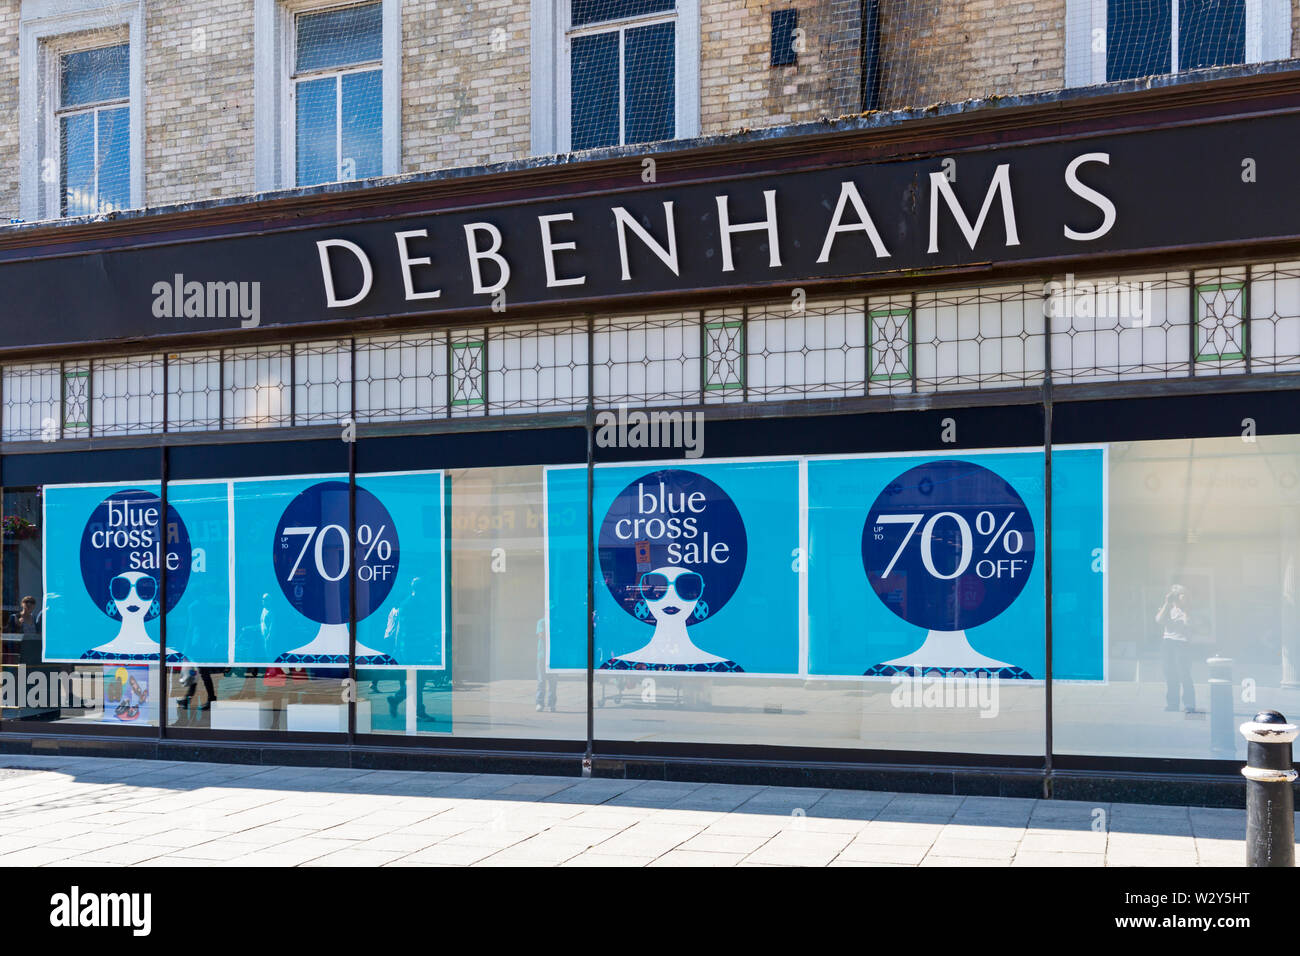 Debenhams store shop with blue cross sale up to 70% off advertised in front window at Winchester, Hampshire, UK in July Stock Photo